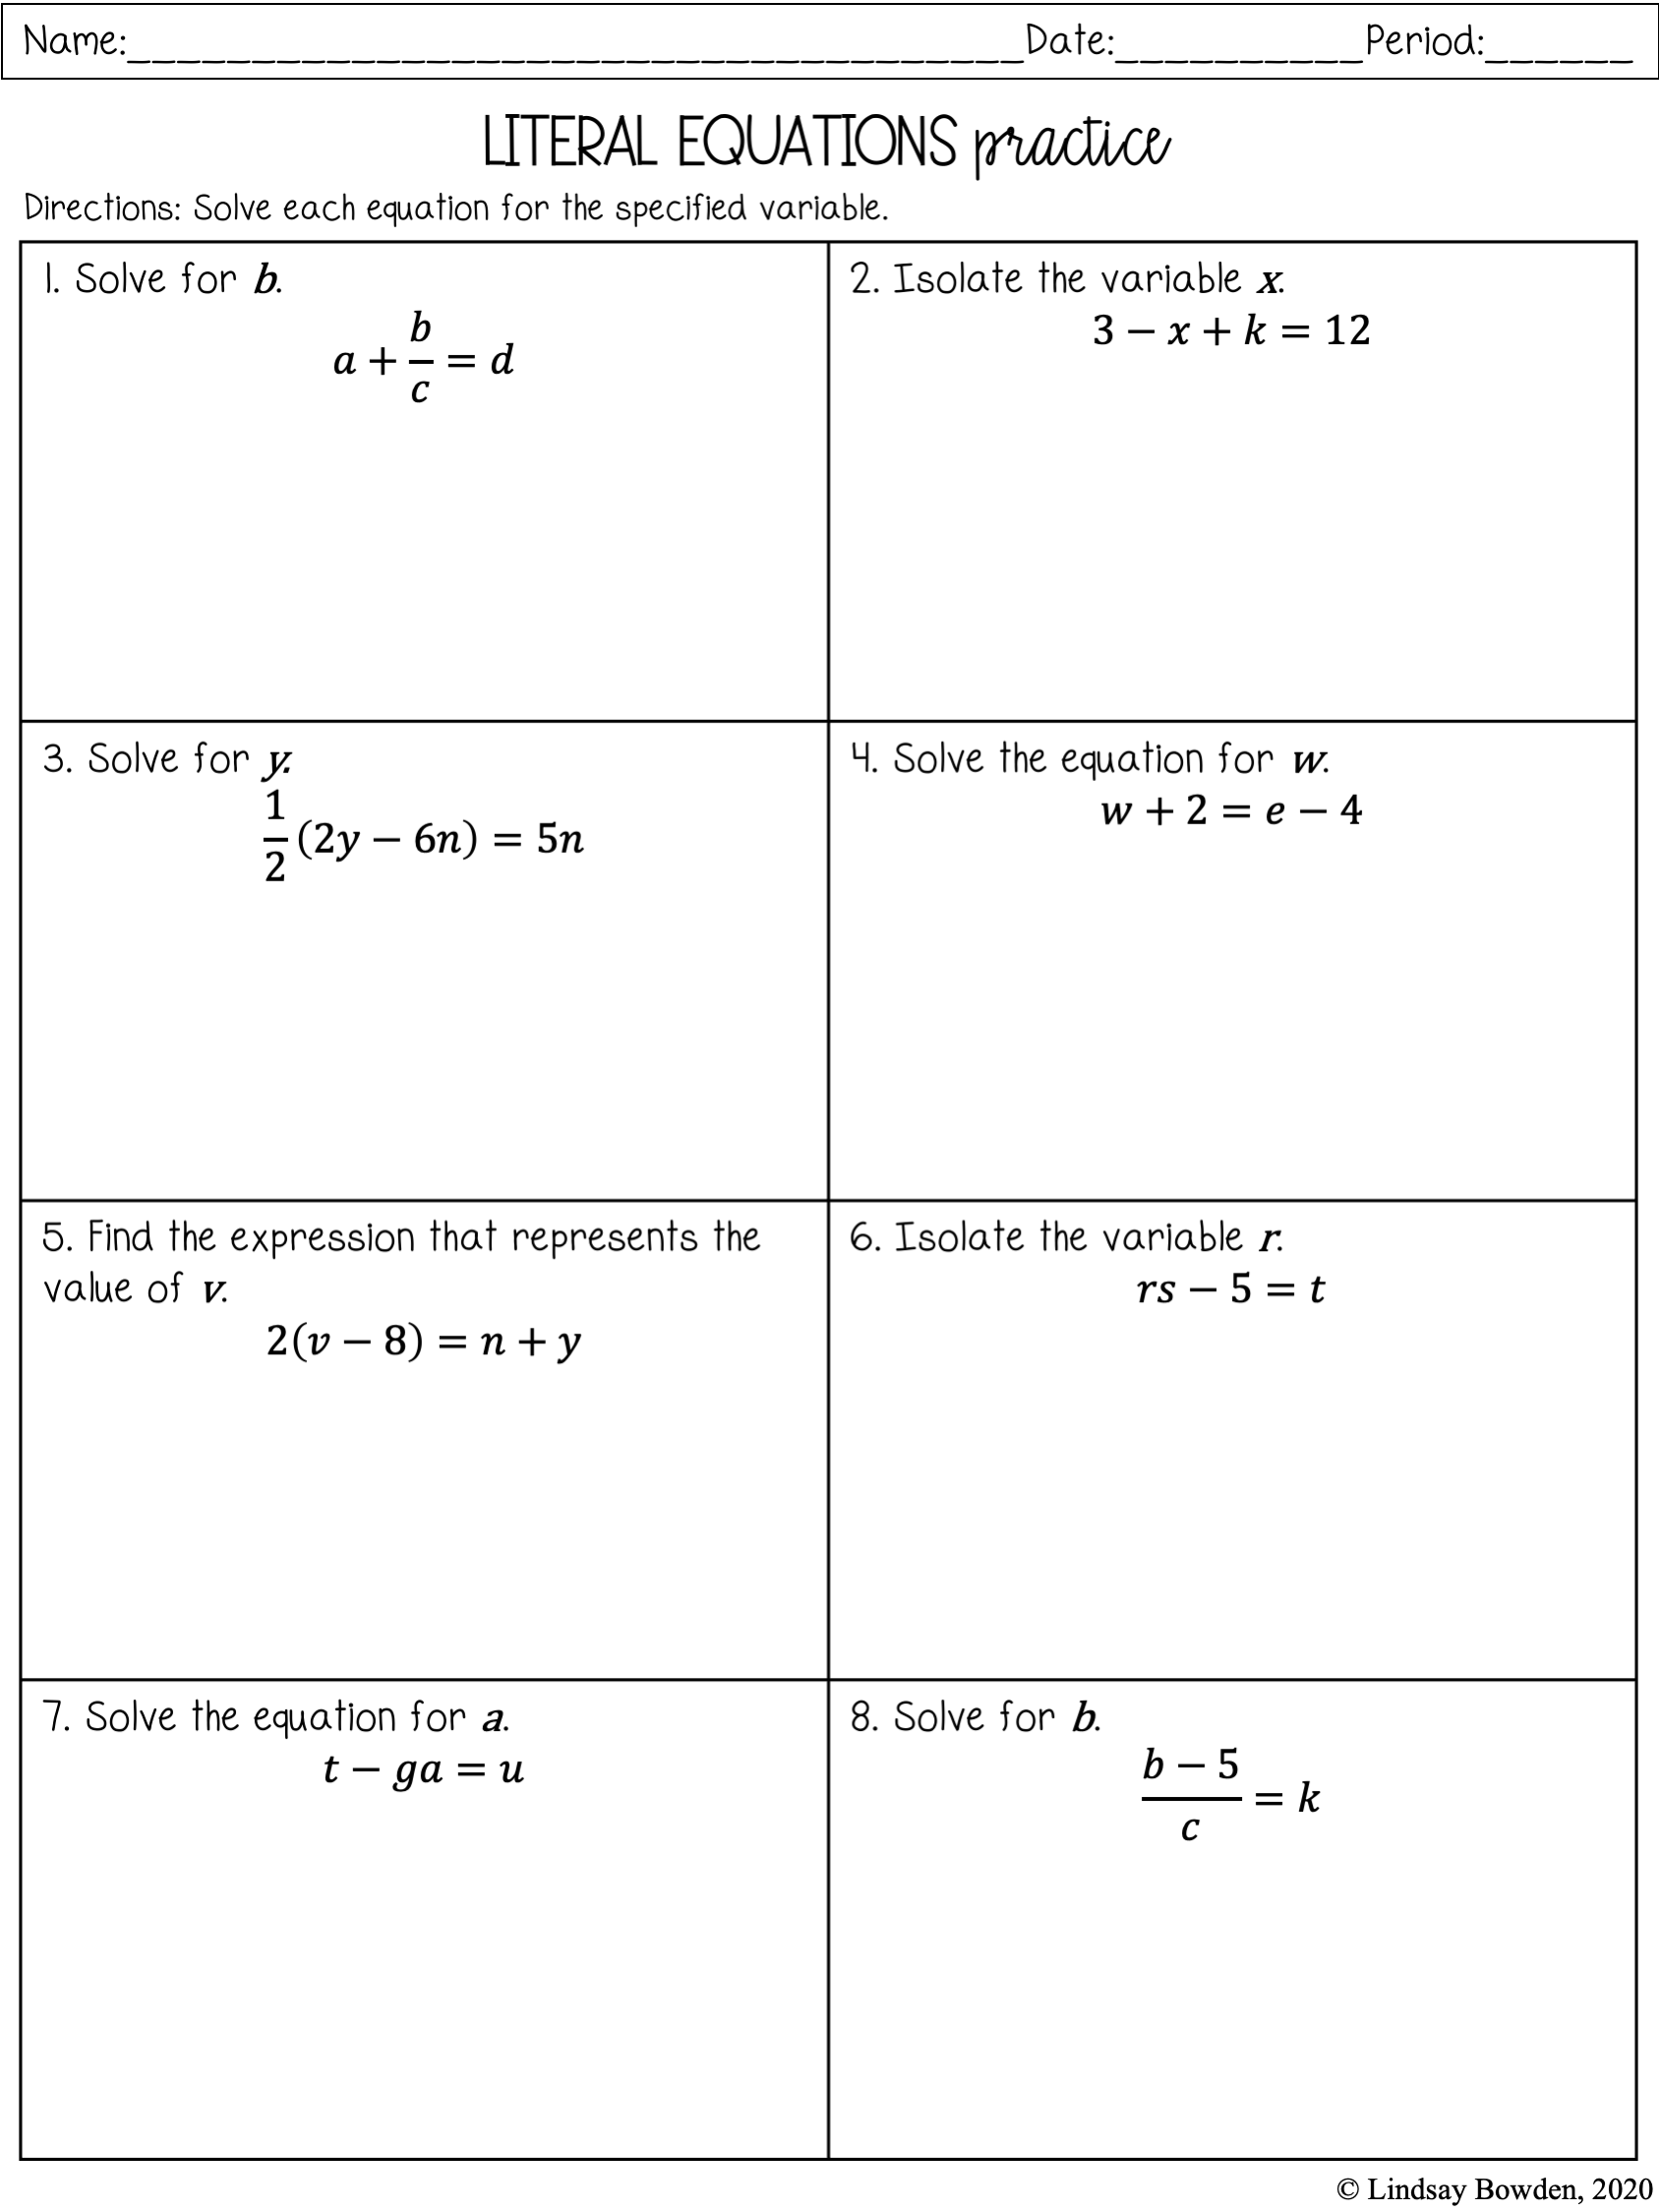 Literal Equations Notes and Worksheets - Lindsay Bowden With Regard To Solve Literal Equations Worksheet